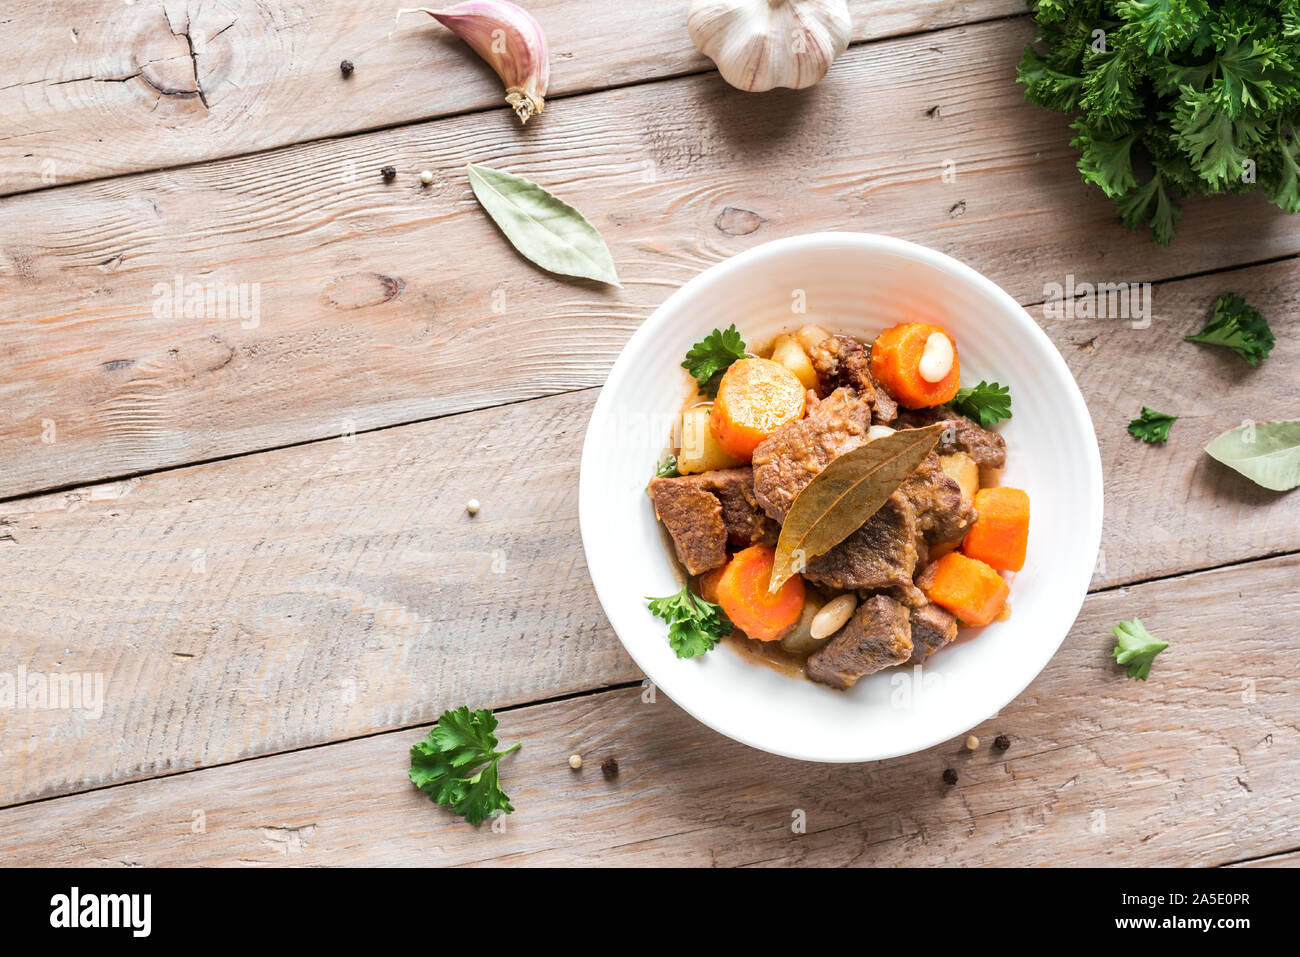 Beef meat stewed with potatoes, carrots and spices on wooden background, top view, copy space. Homemade winter comfort food - slow cooked meat stew. Stock Photo